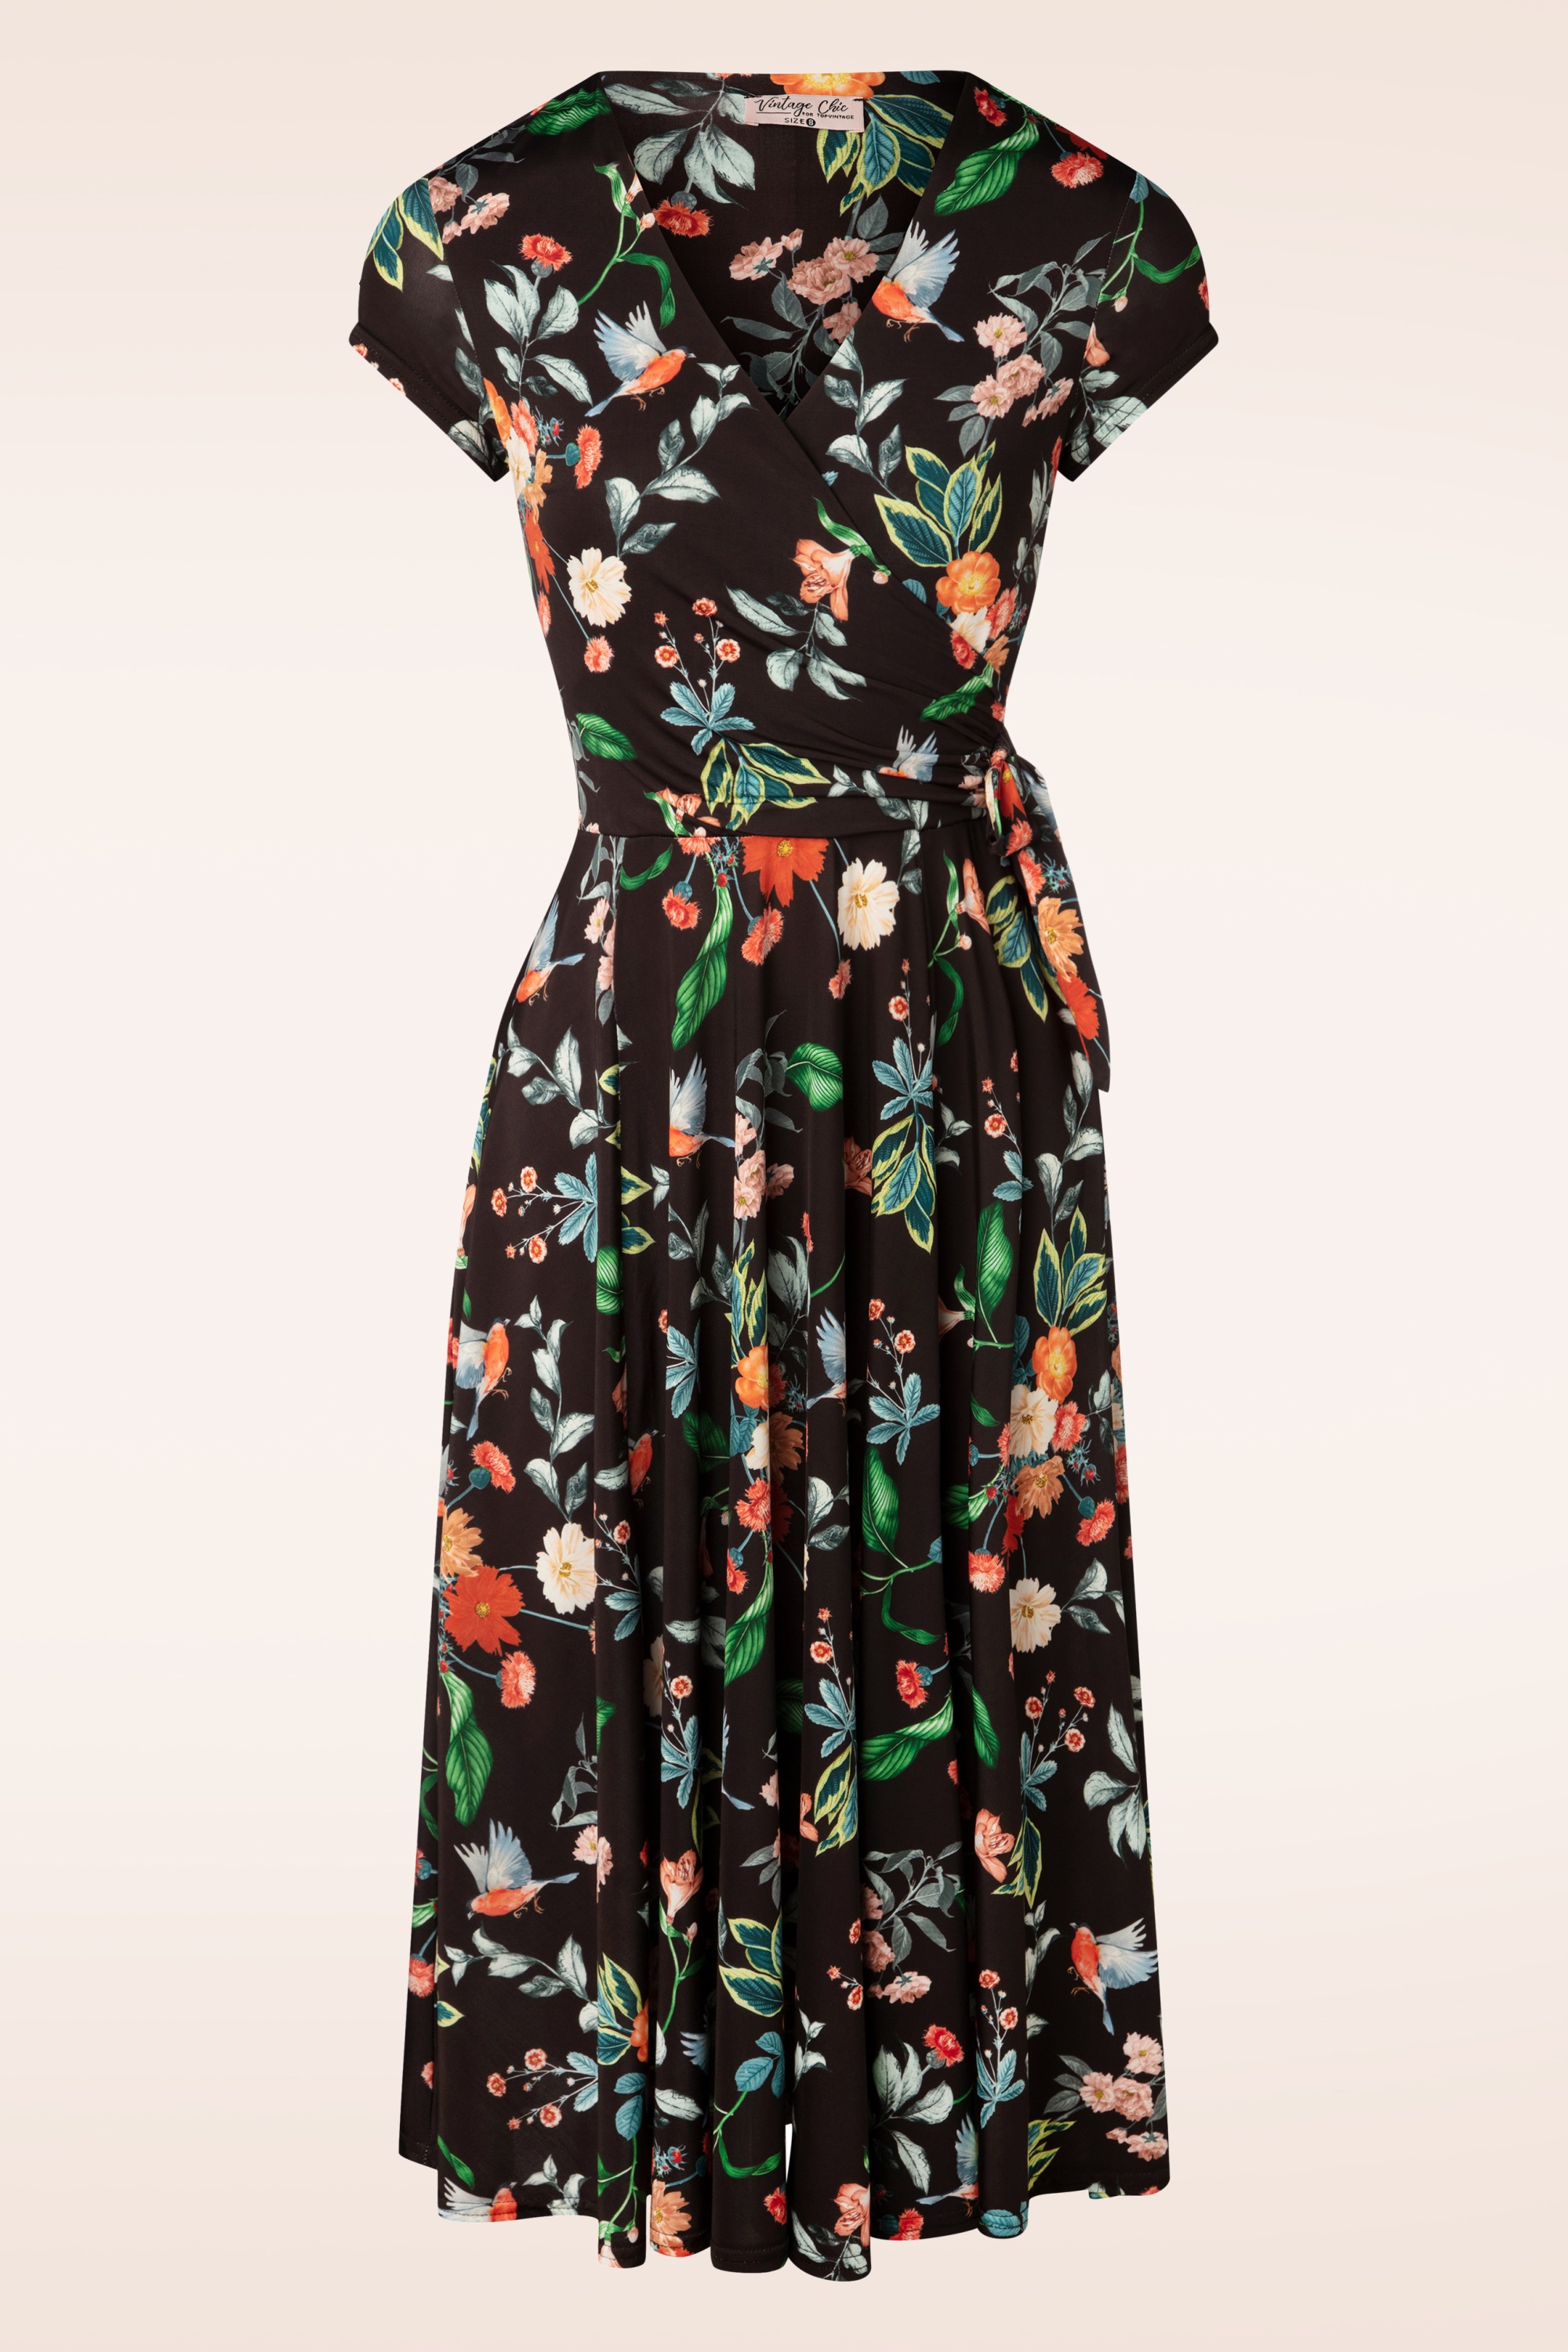 Vintage Chic for Topvintage - Layla Floral Cross Over jurk in zwart